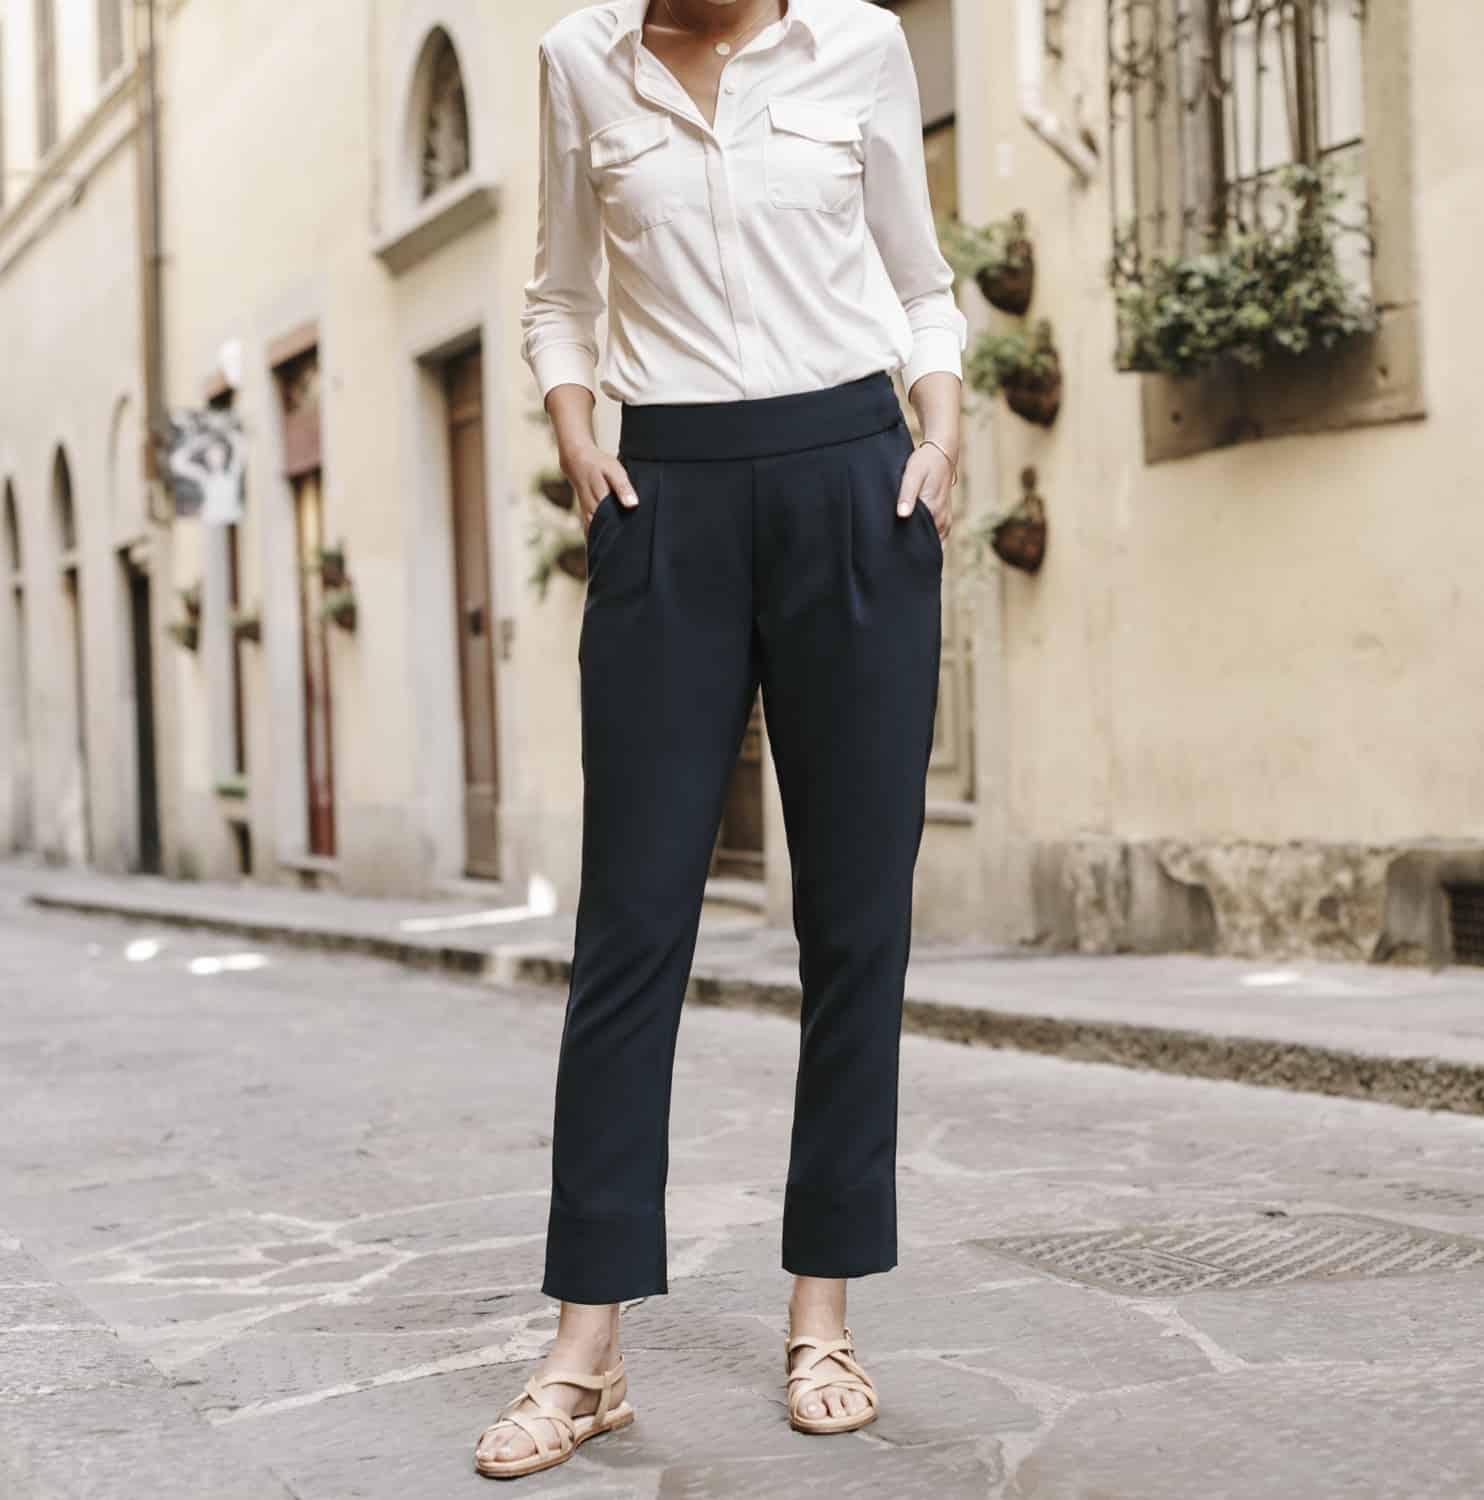 Bluffworks Trevi Pants for women worn with Azores blouse